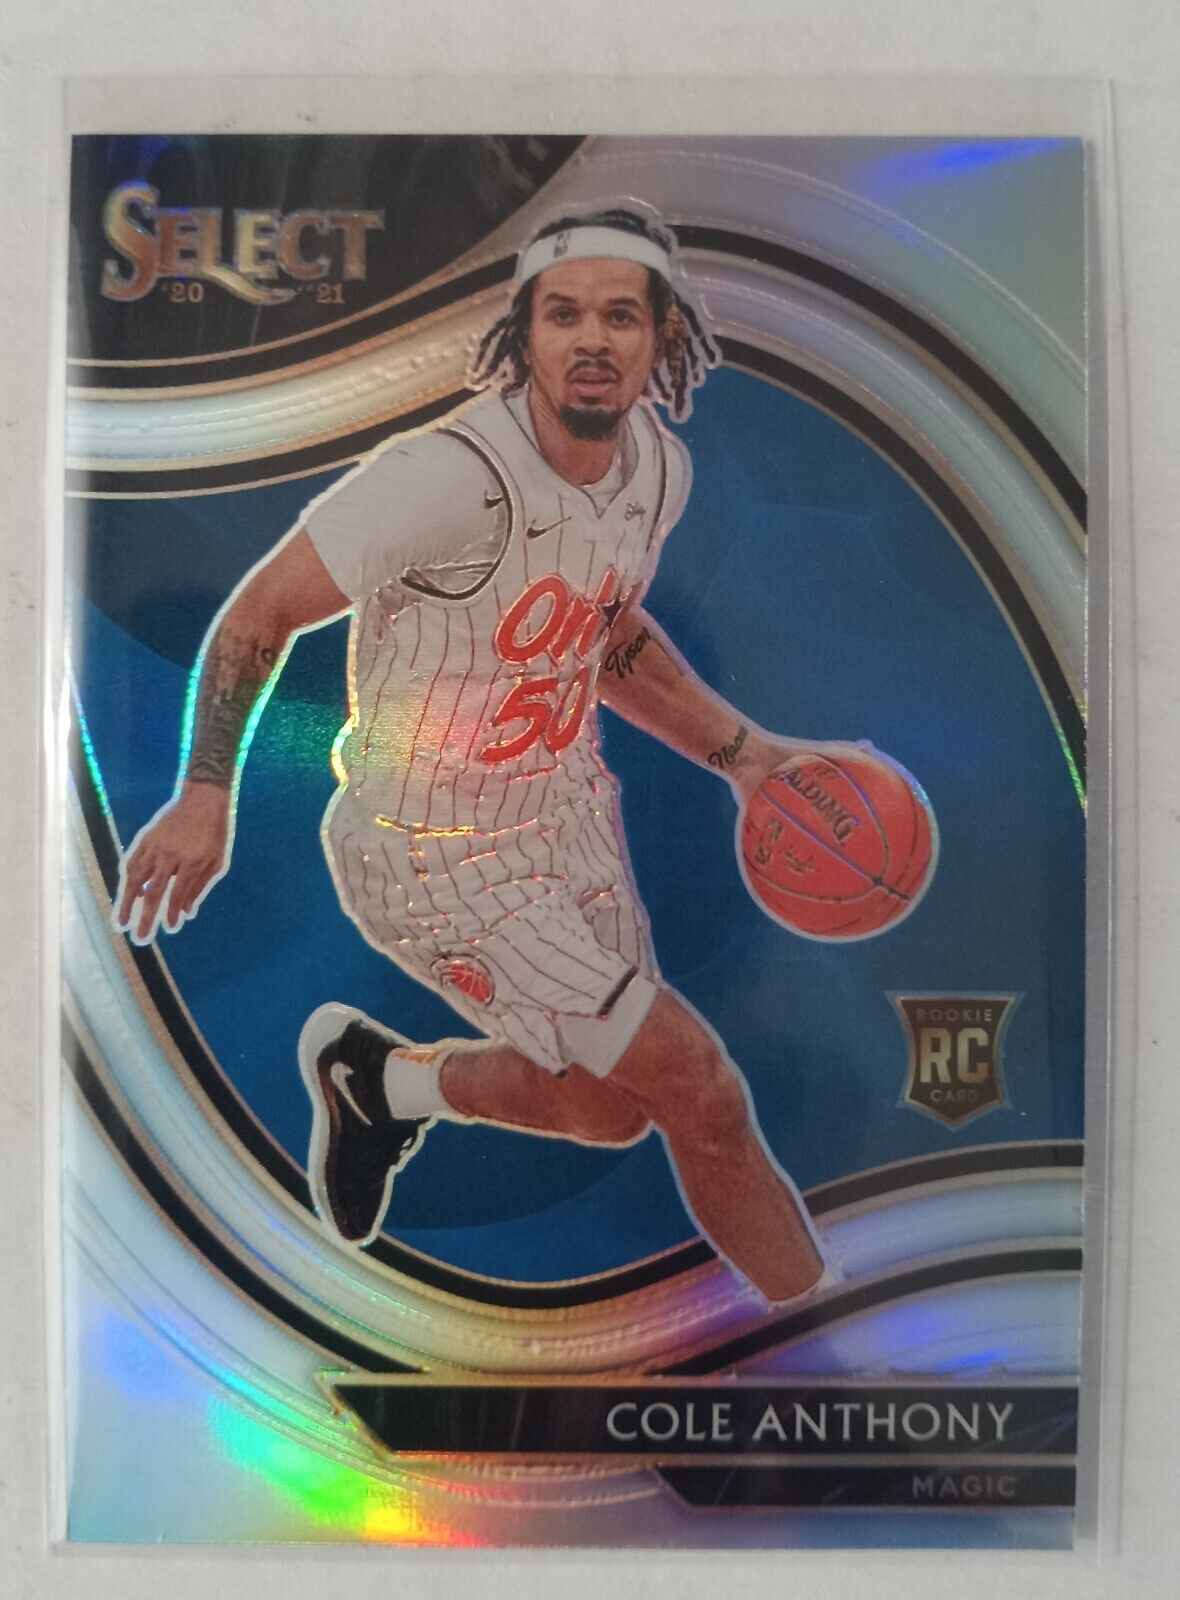 2020-21 Panini Select Courtside Silver Prizm Sp Cole Anthony Rc #286 🏀